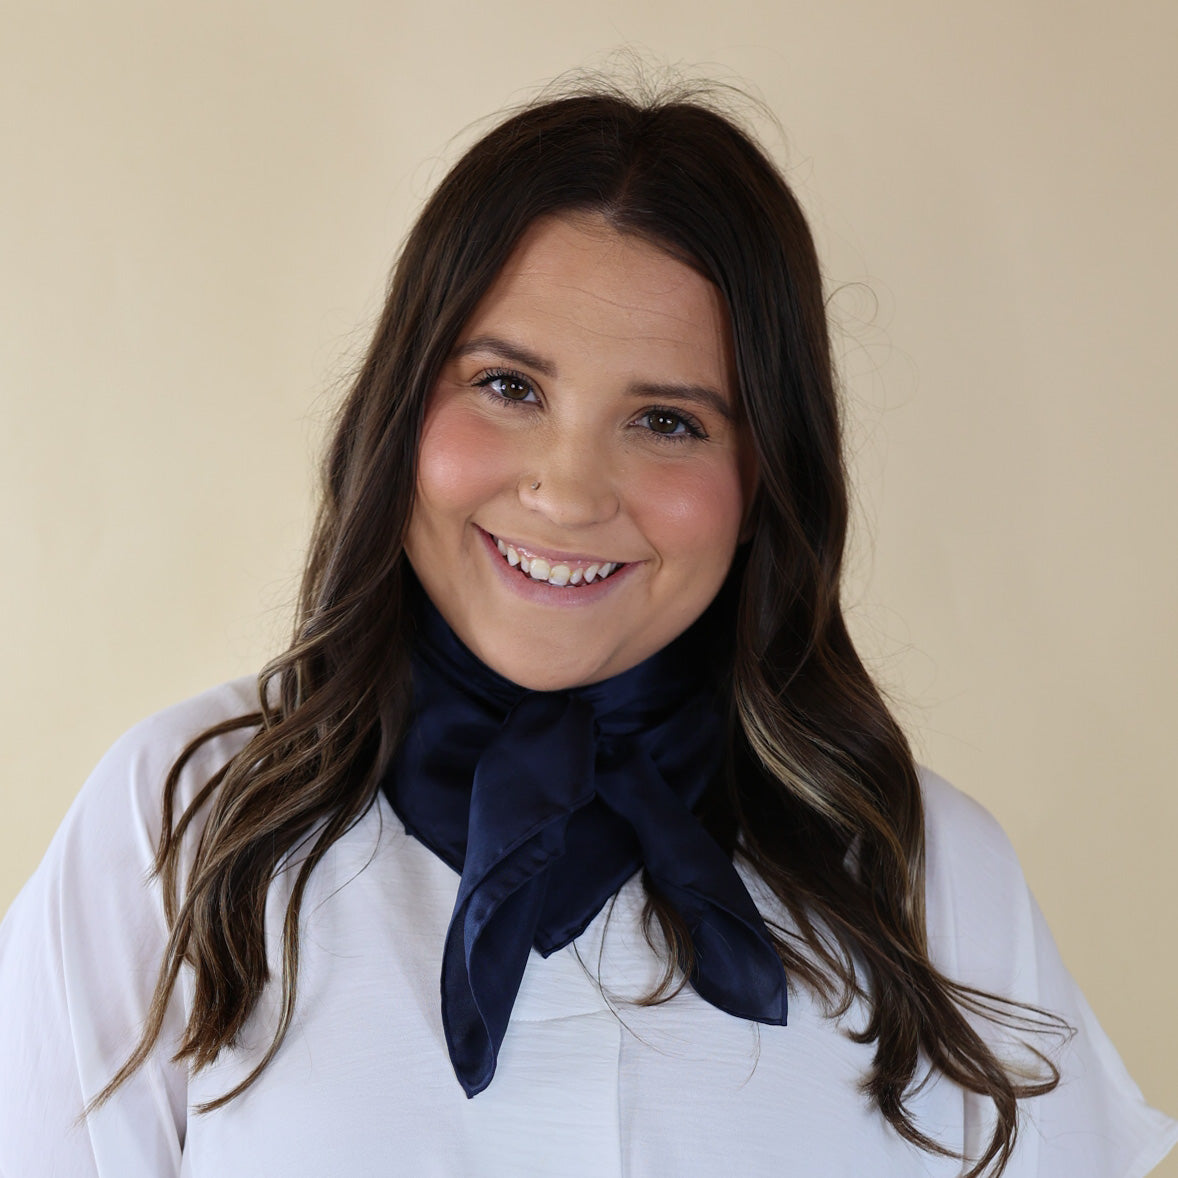 Brunette model is pictured wearing a white, Drop shoulder top with a Solid Navy Blue scarf tied around her neck. Model is pictured in front of a beige background.